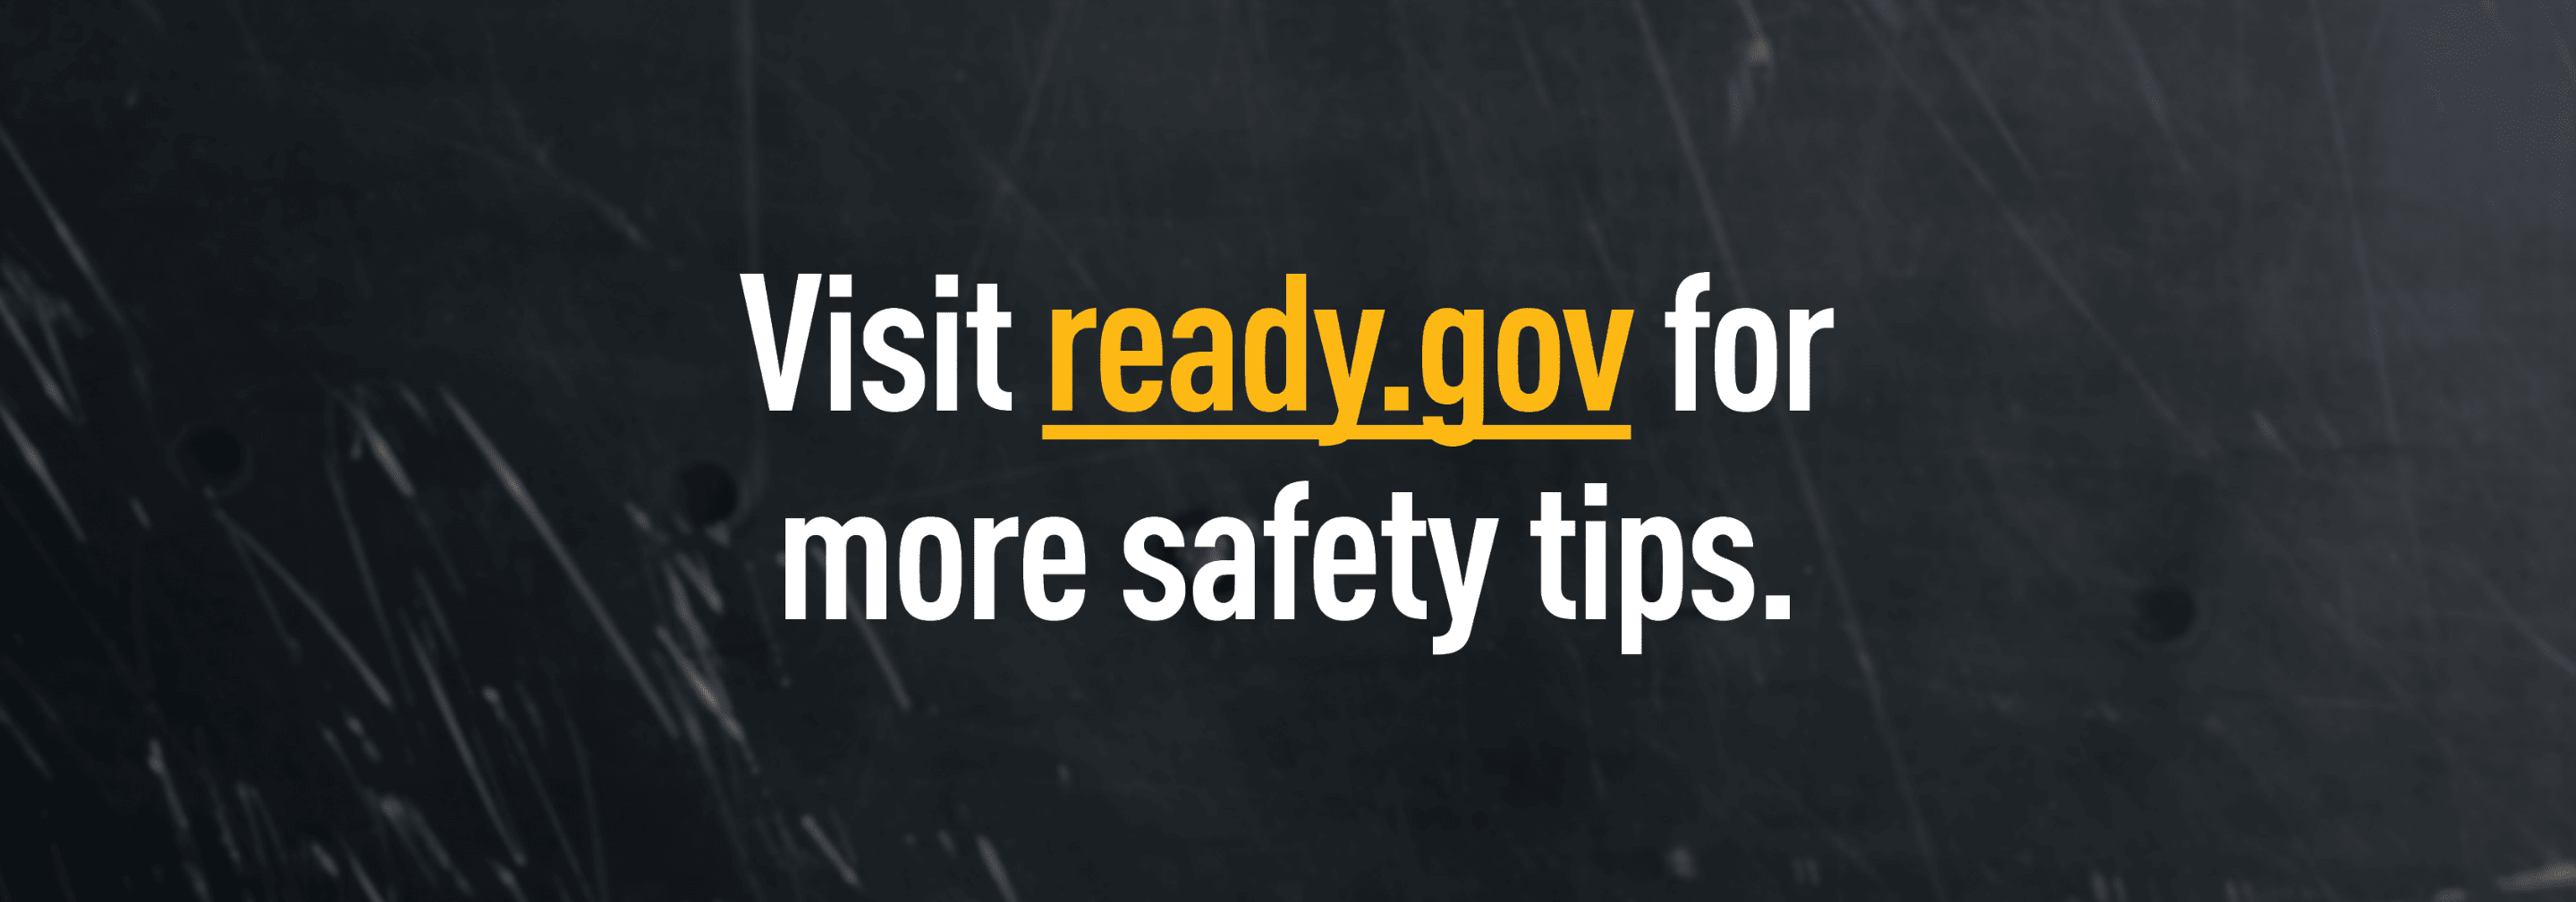 Text: Visit ready.gov for more safety tips.